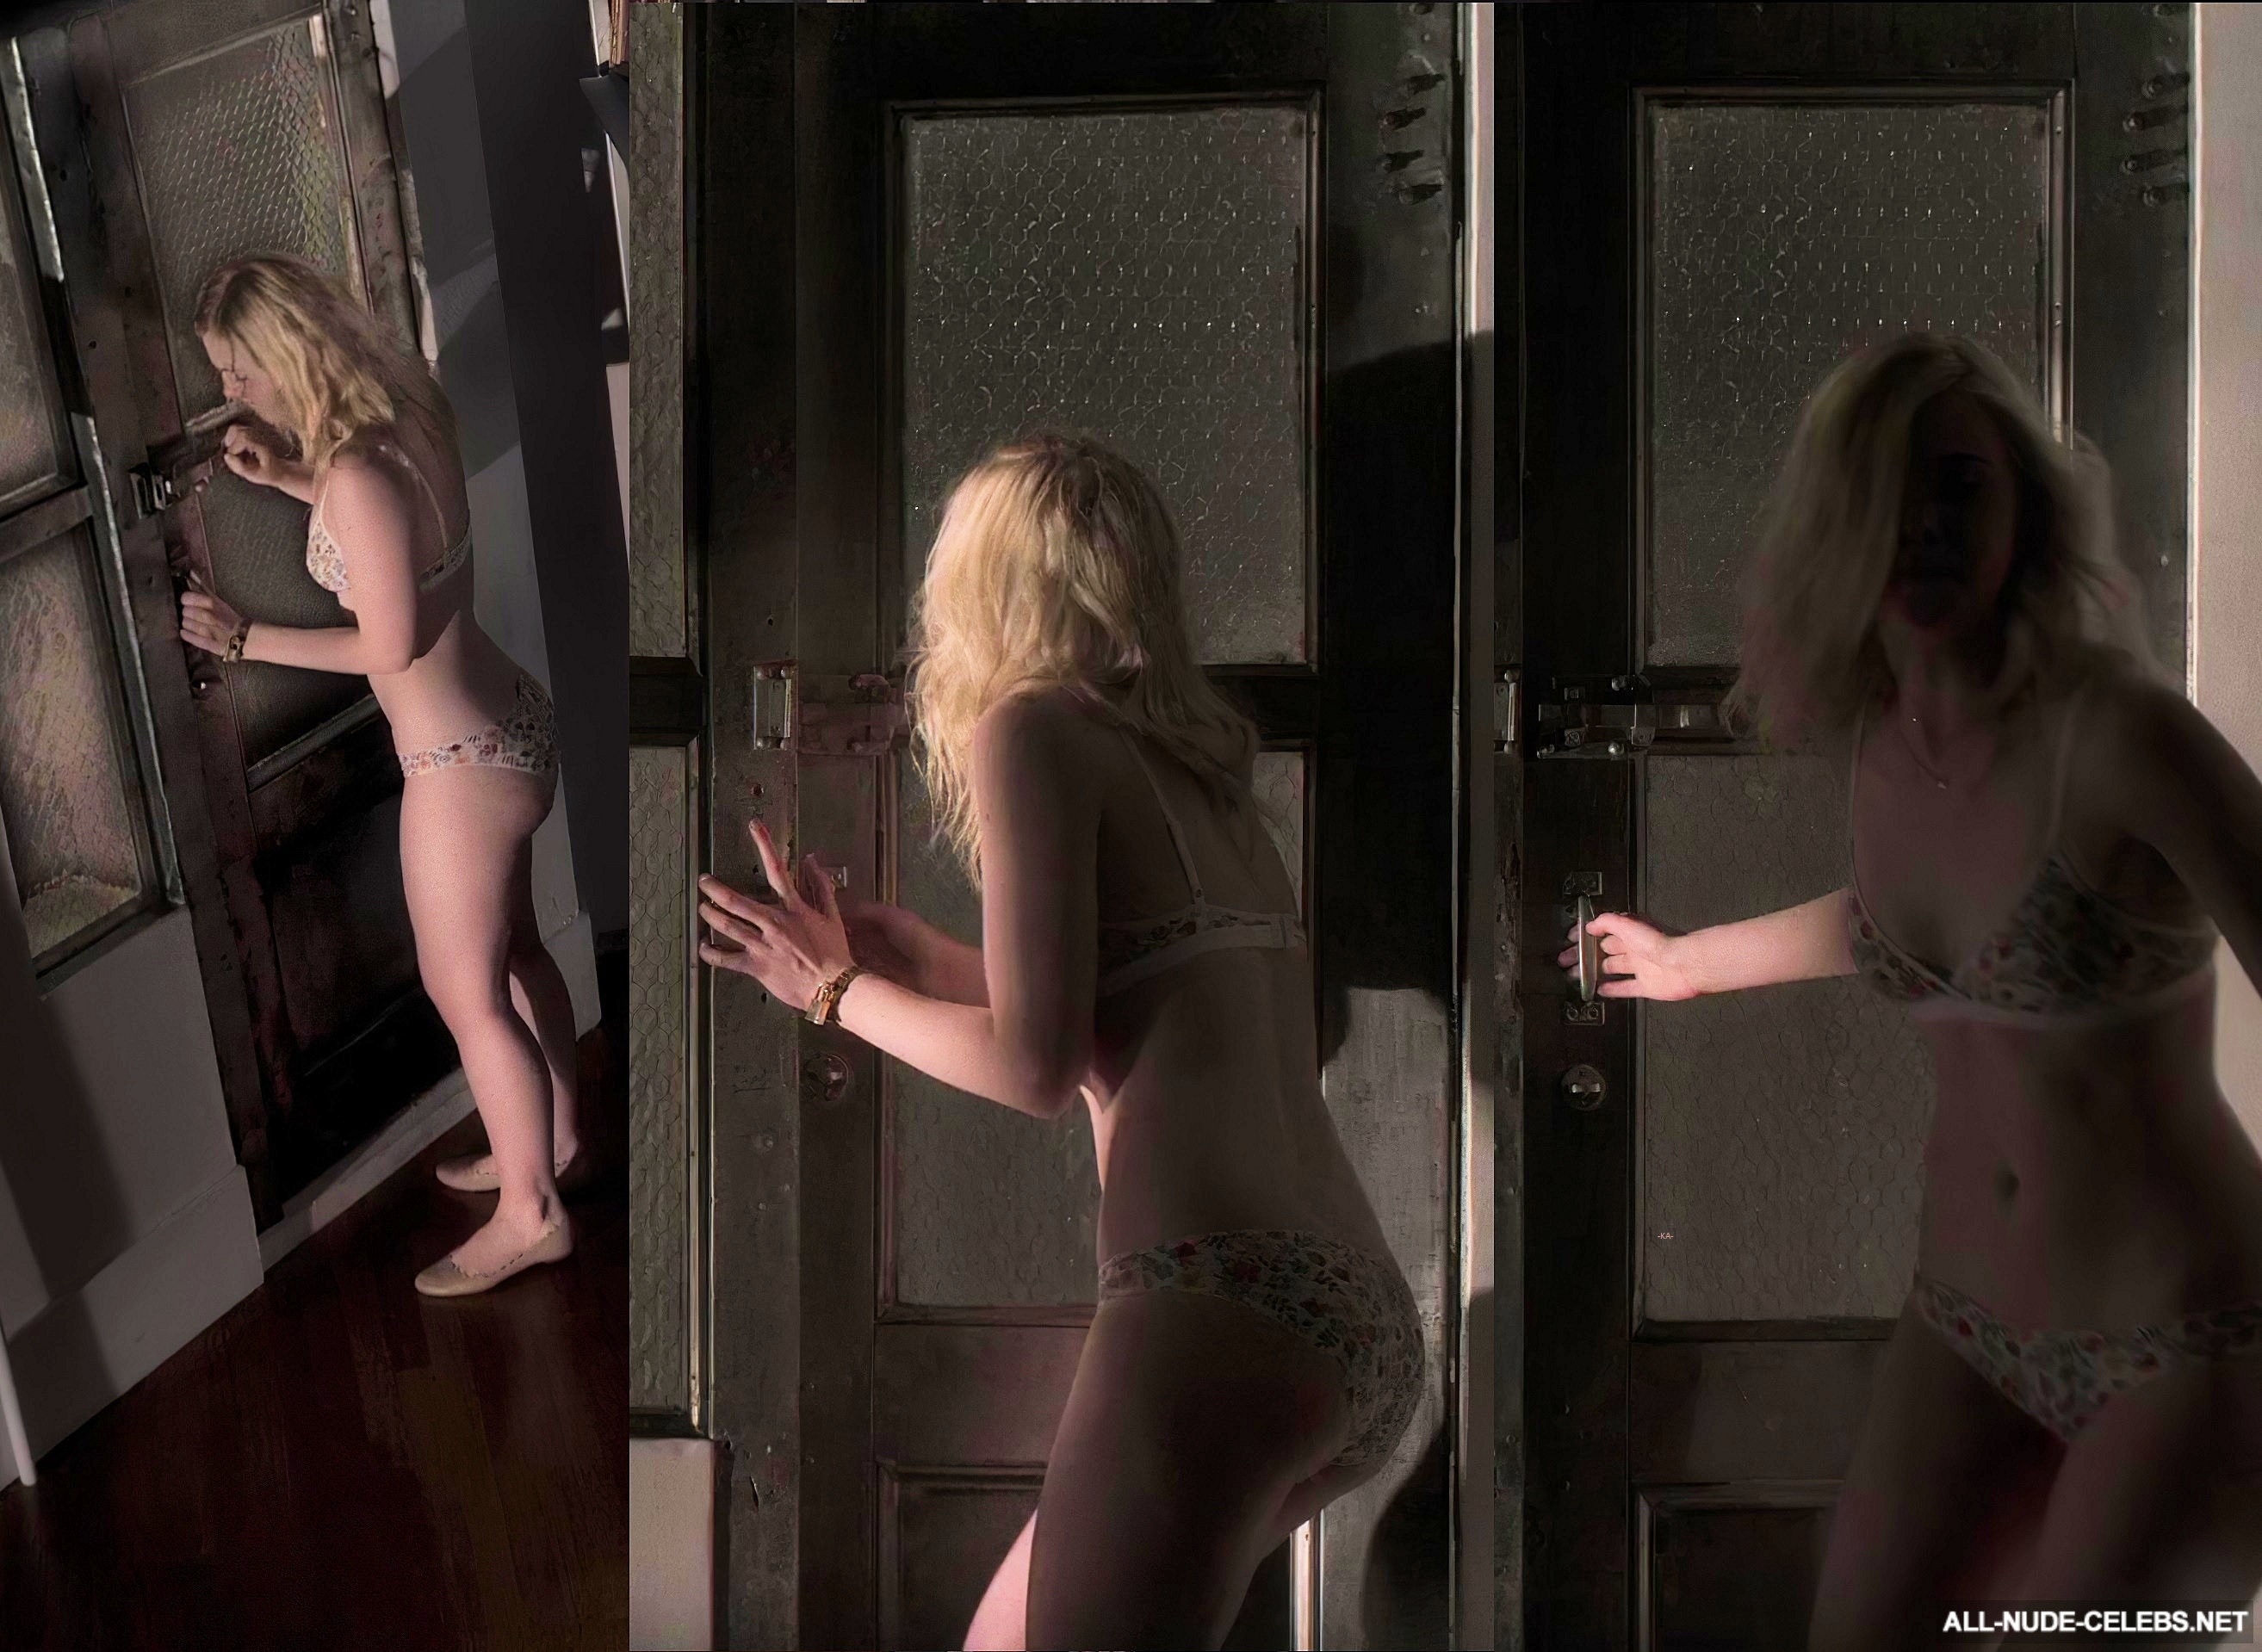 Elle Fanning sexy and oops photos.